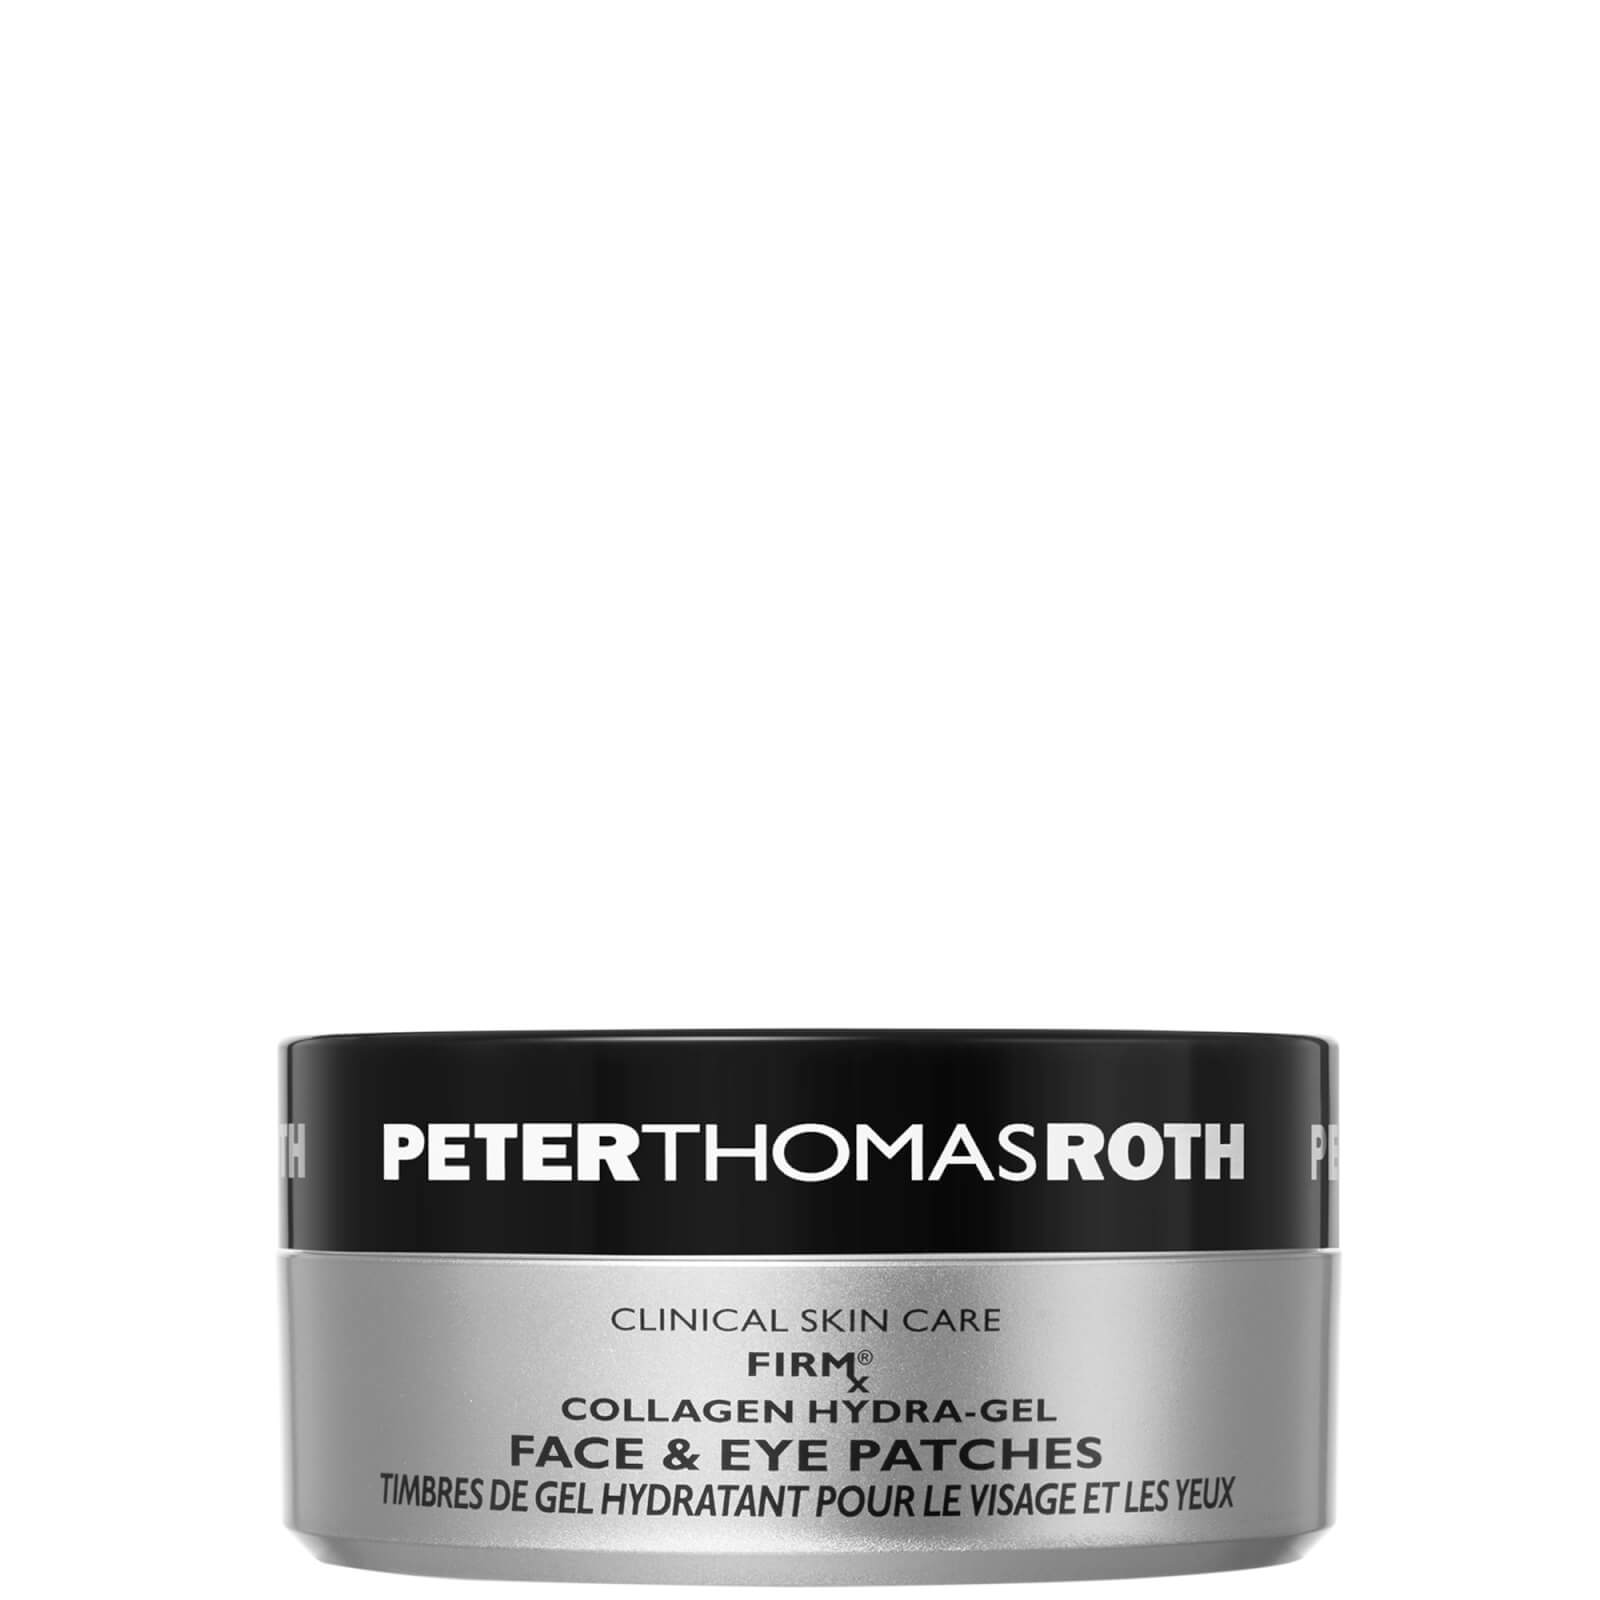 Photos - Facial Mask Peter Thomas Roth FIRMx Collagen Hydra-Gel Face and Eye Patches 2201023